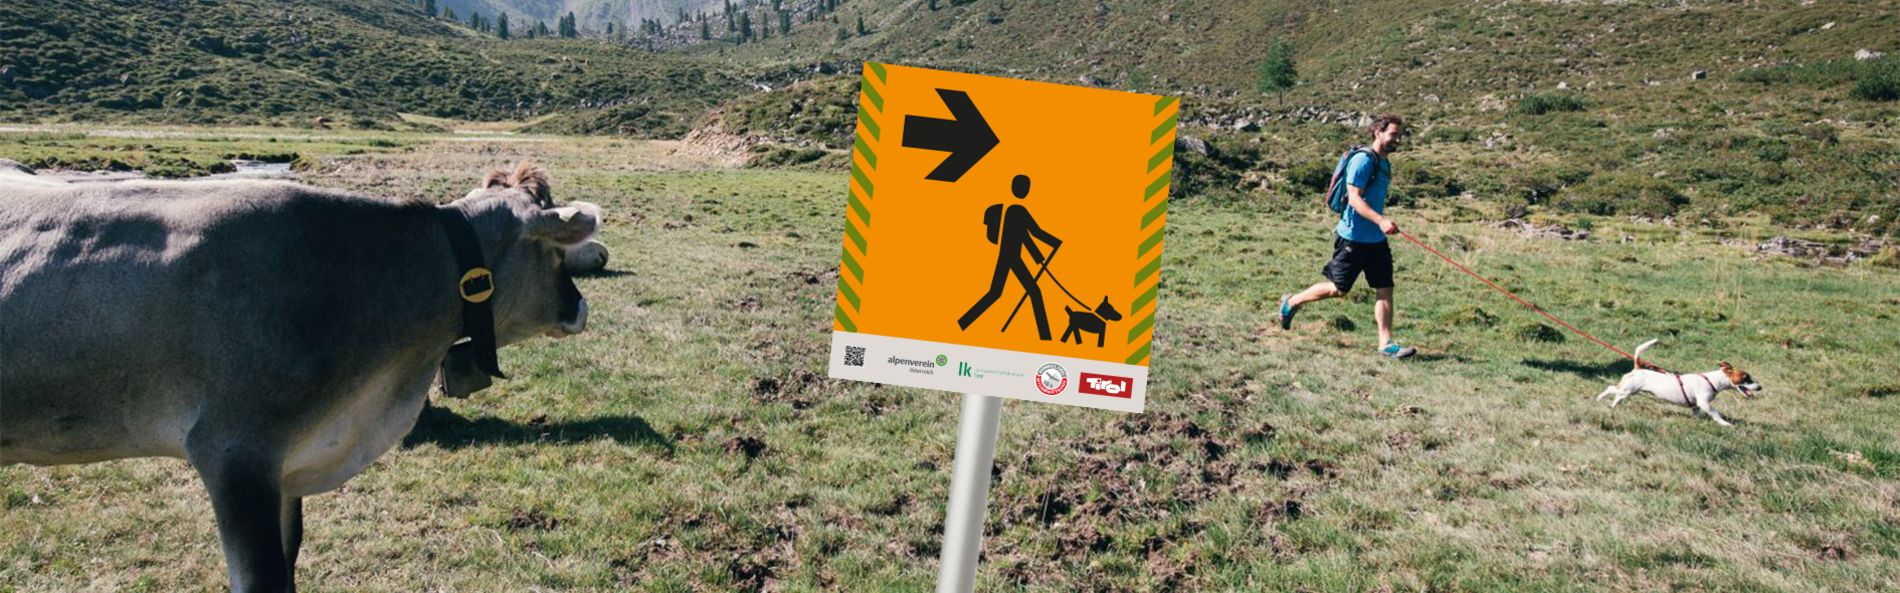 Direction sign bypass possibility for hikers with dog.